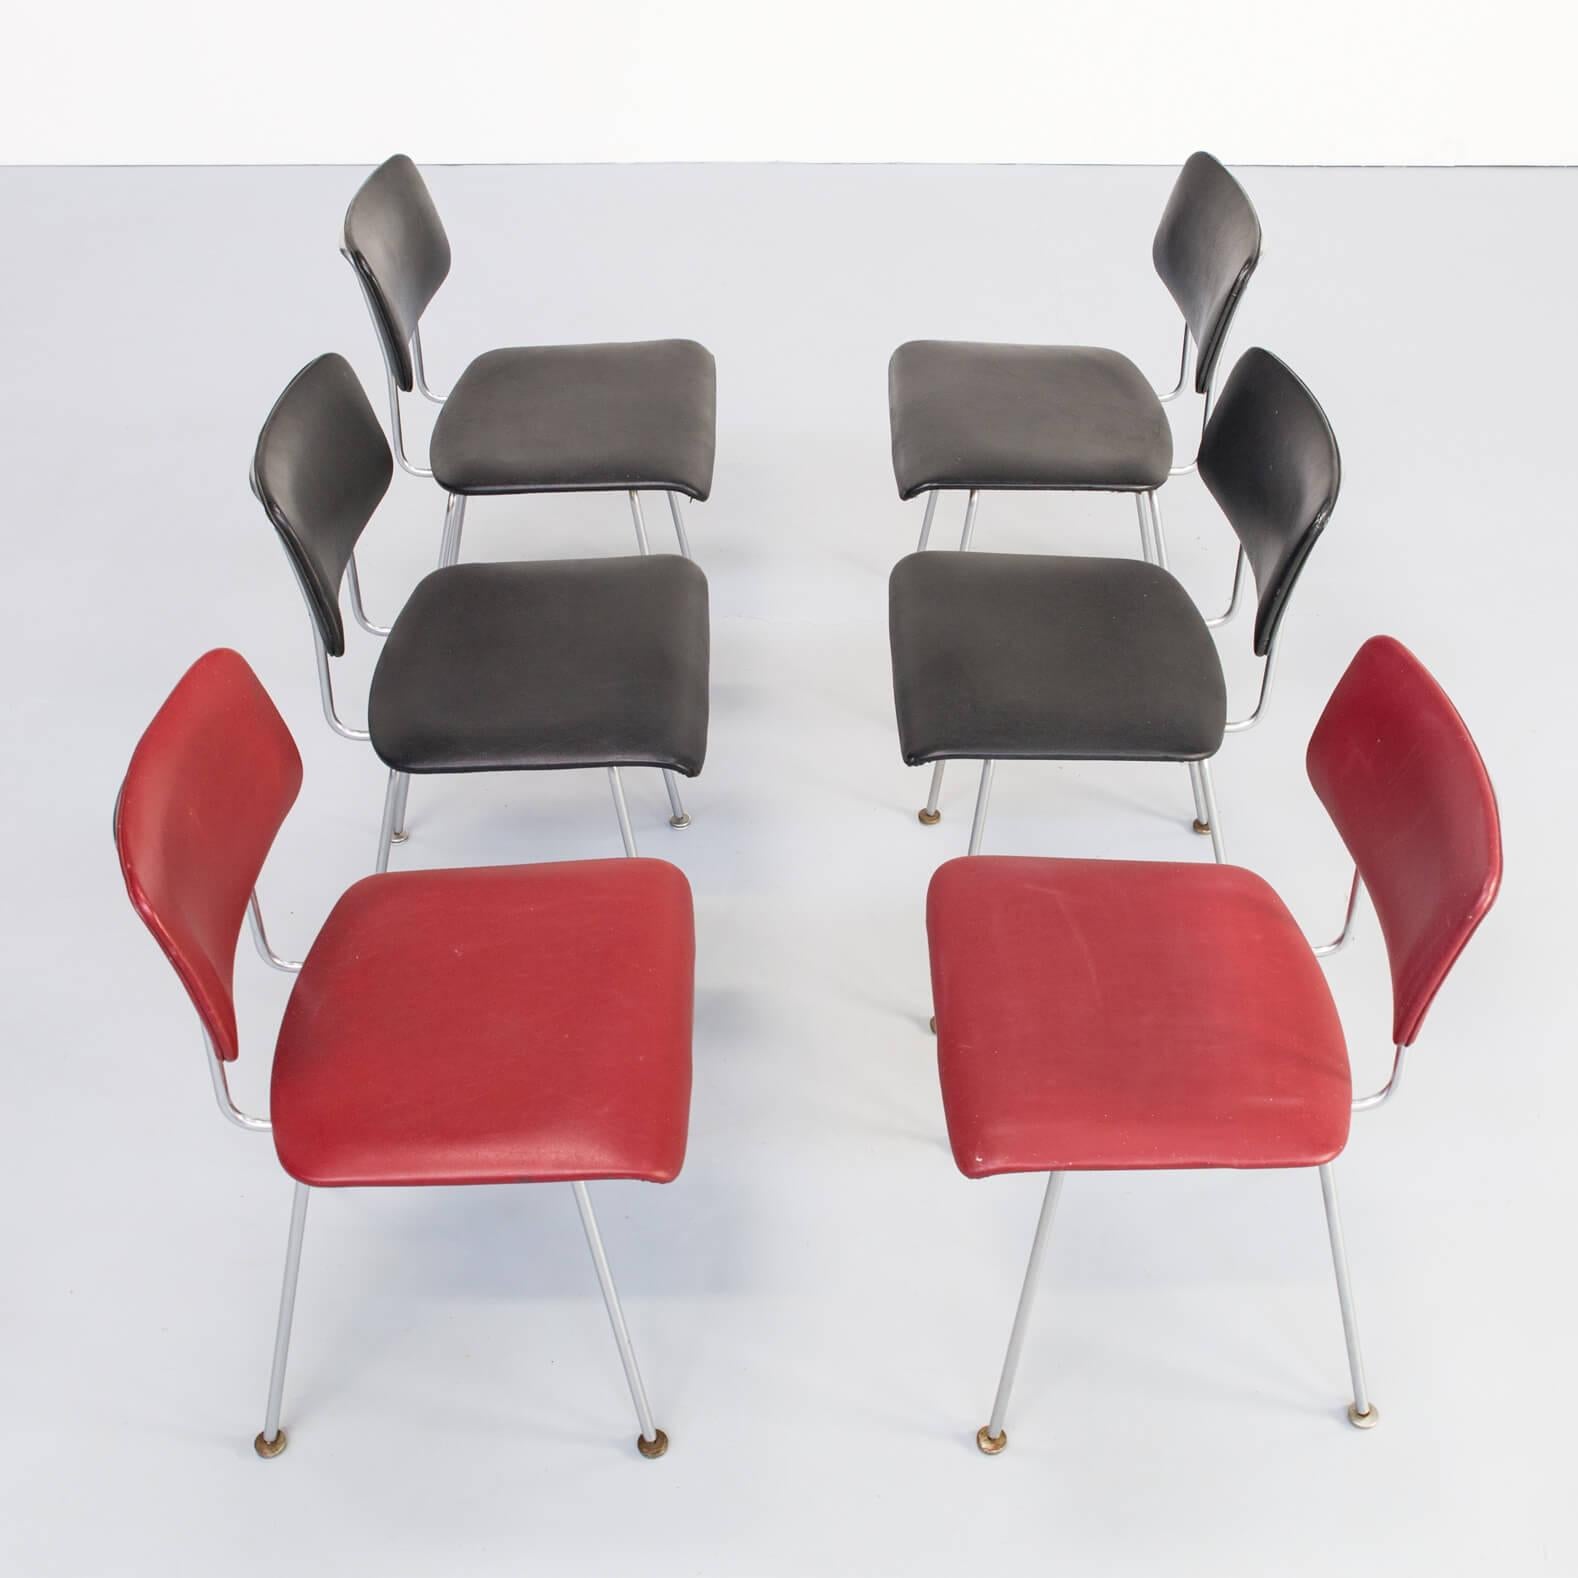 1980s Ontwerpbureau N.v. Gispen 1231/1232 Cirrus Chairs for Gispen, Set of 6 In Good Condition For Sale In Amstelveen, Noord